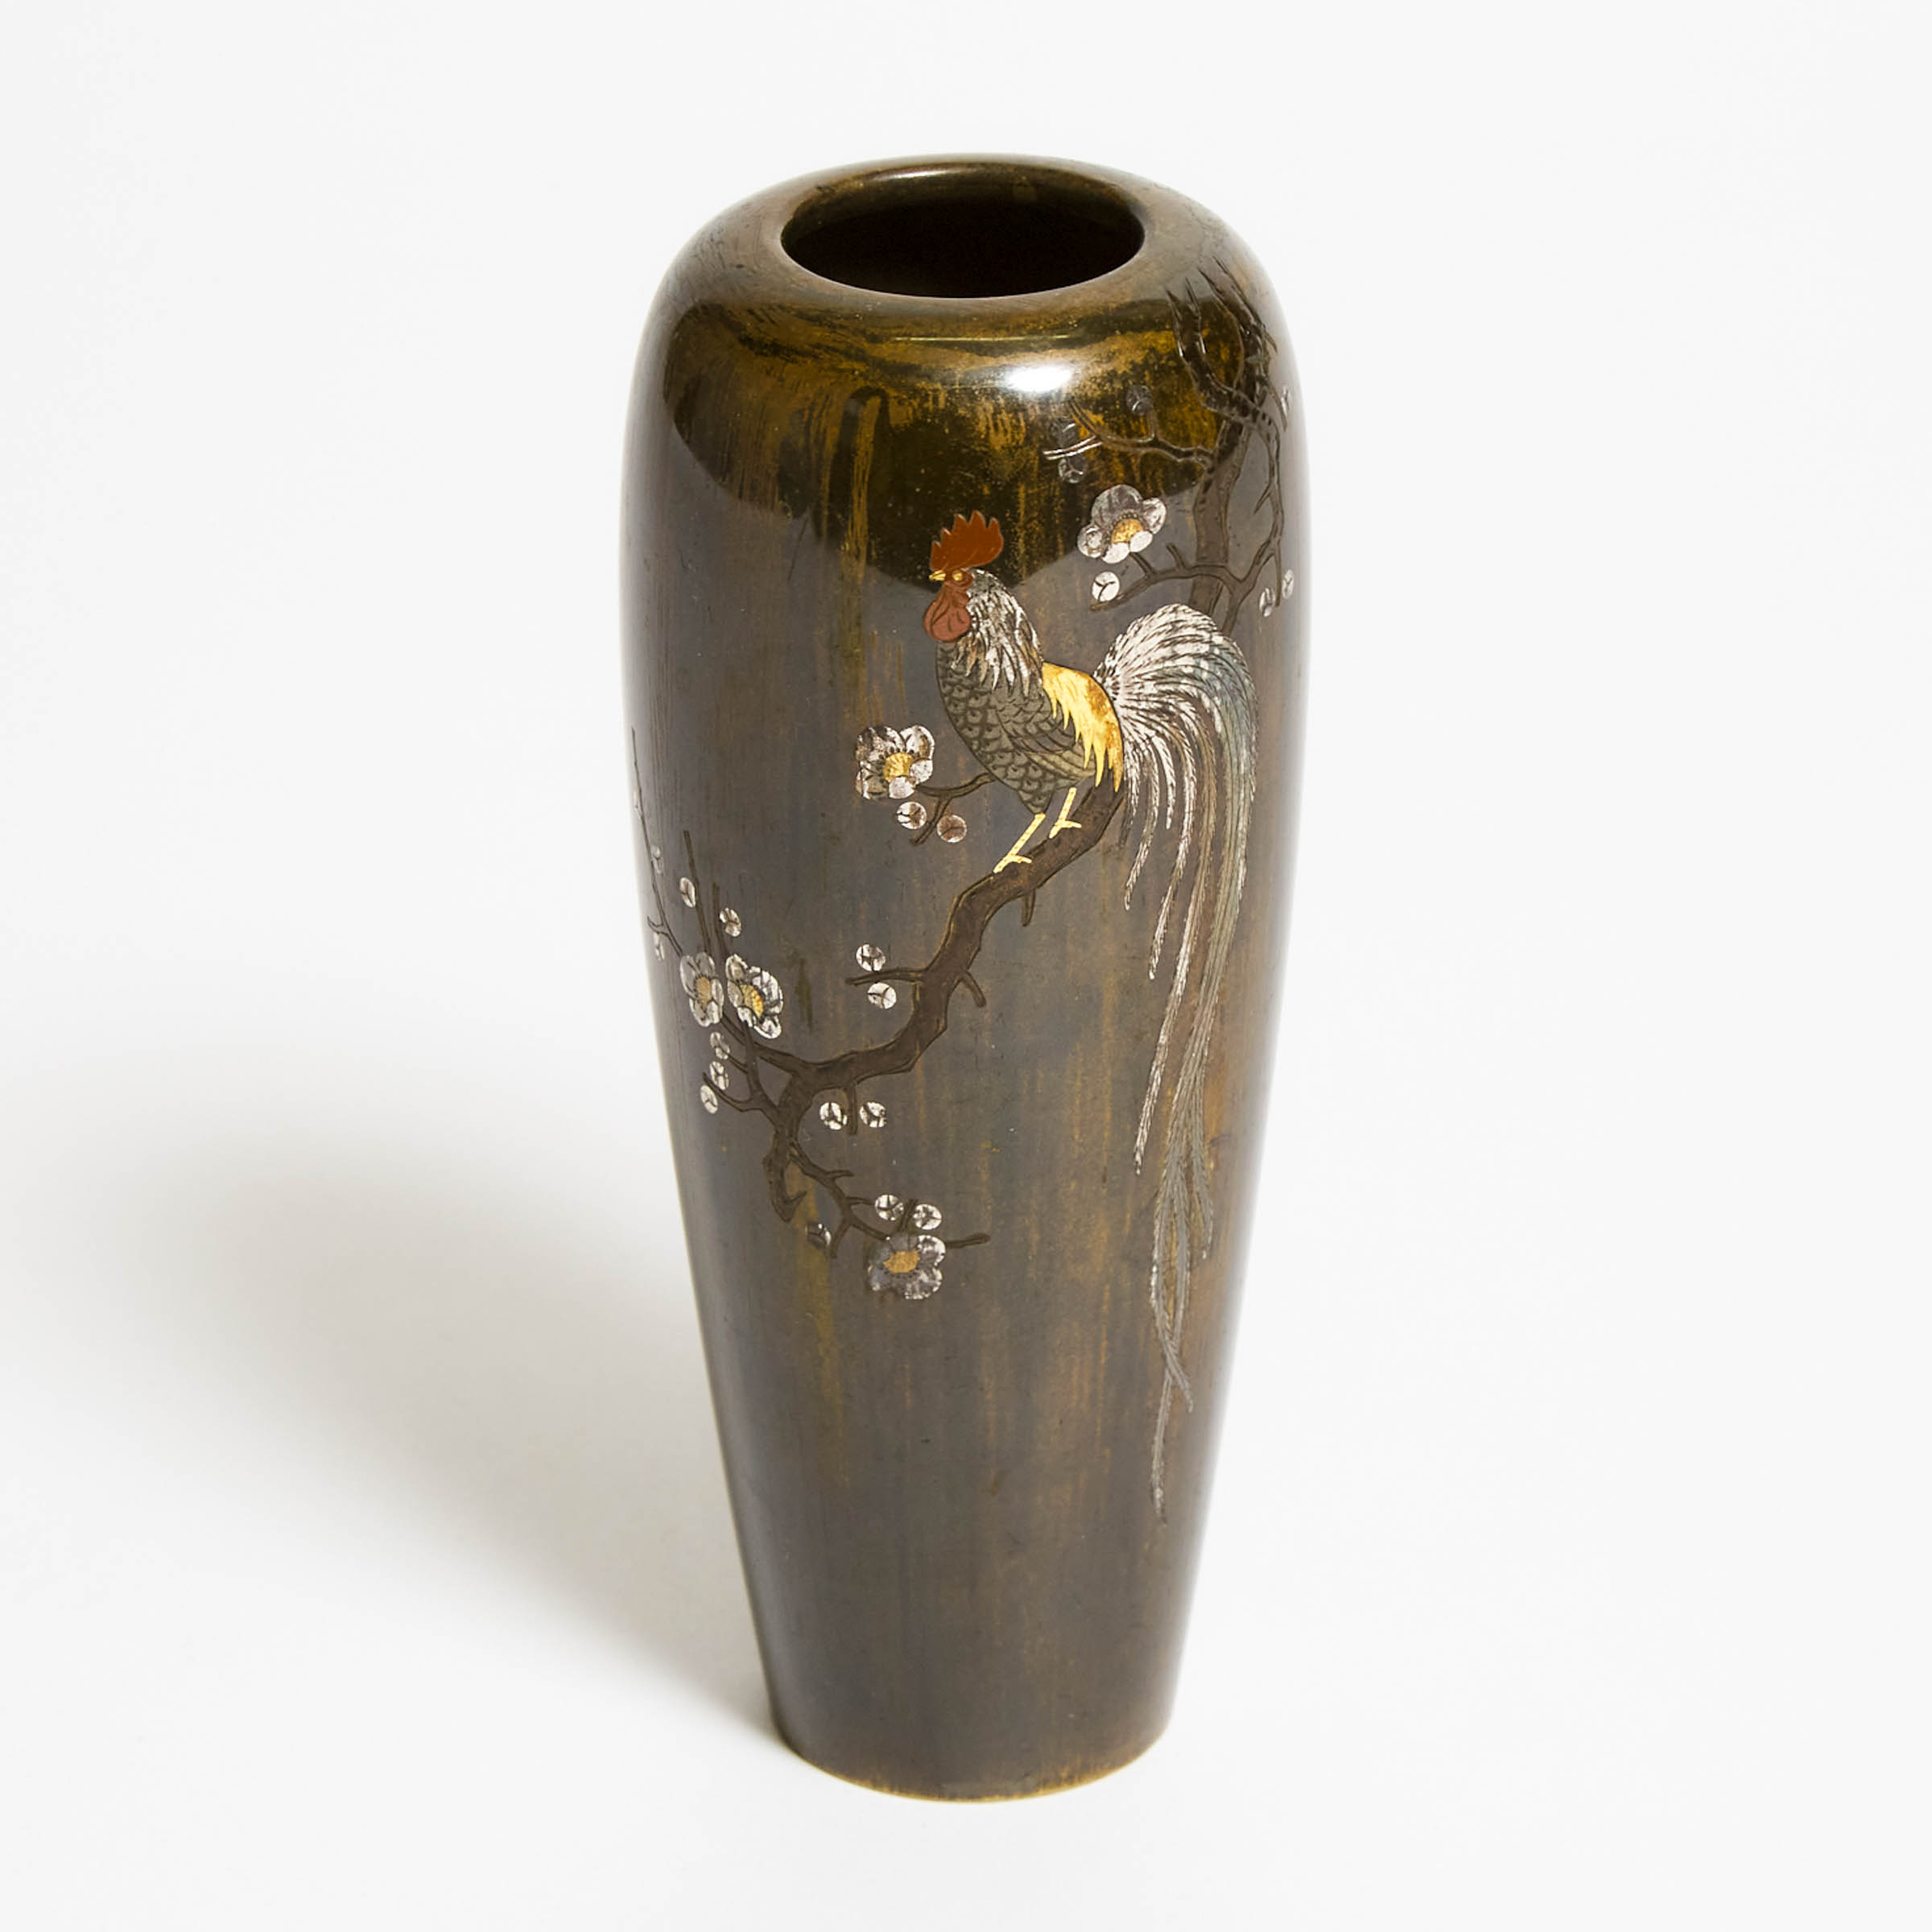 A Japanese Mixed-Metal Inlaid 'Rooster' Vase, Nogawa Mark, Meiji Period (1868-1912)